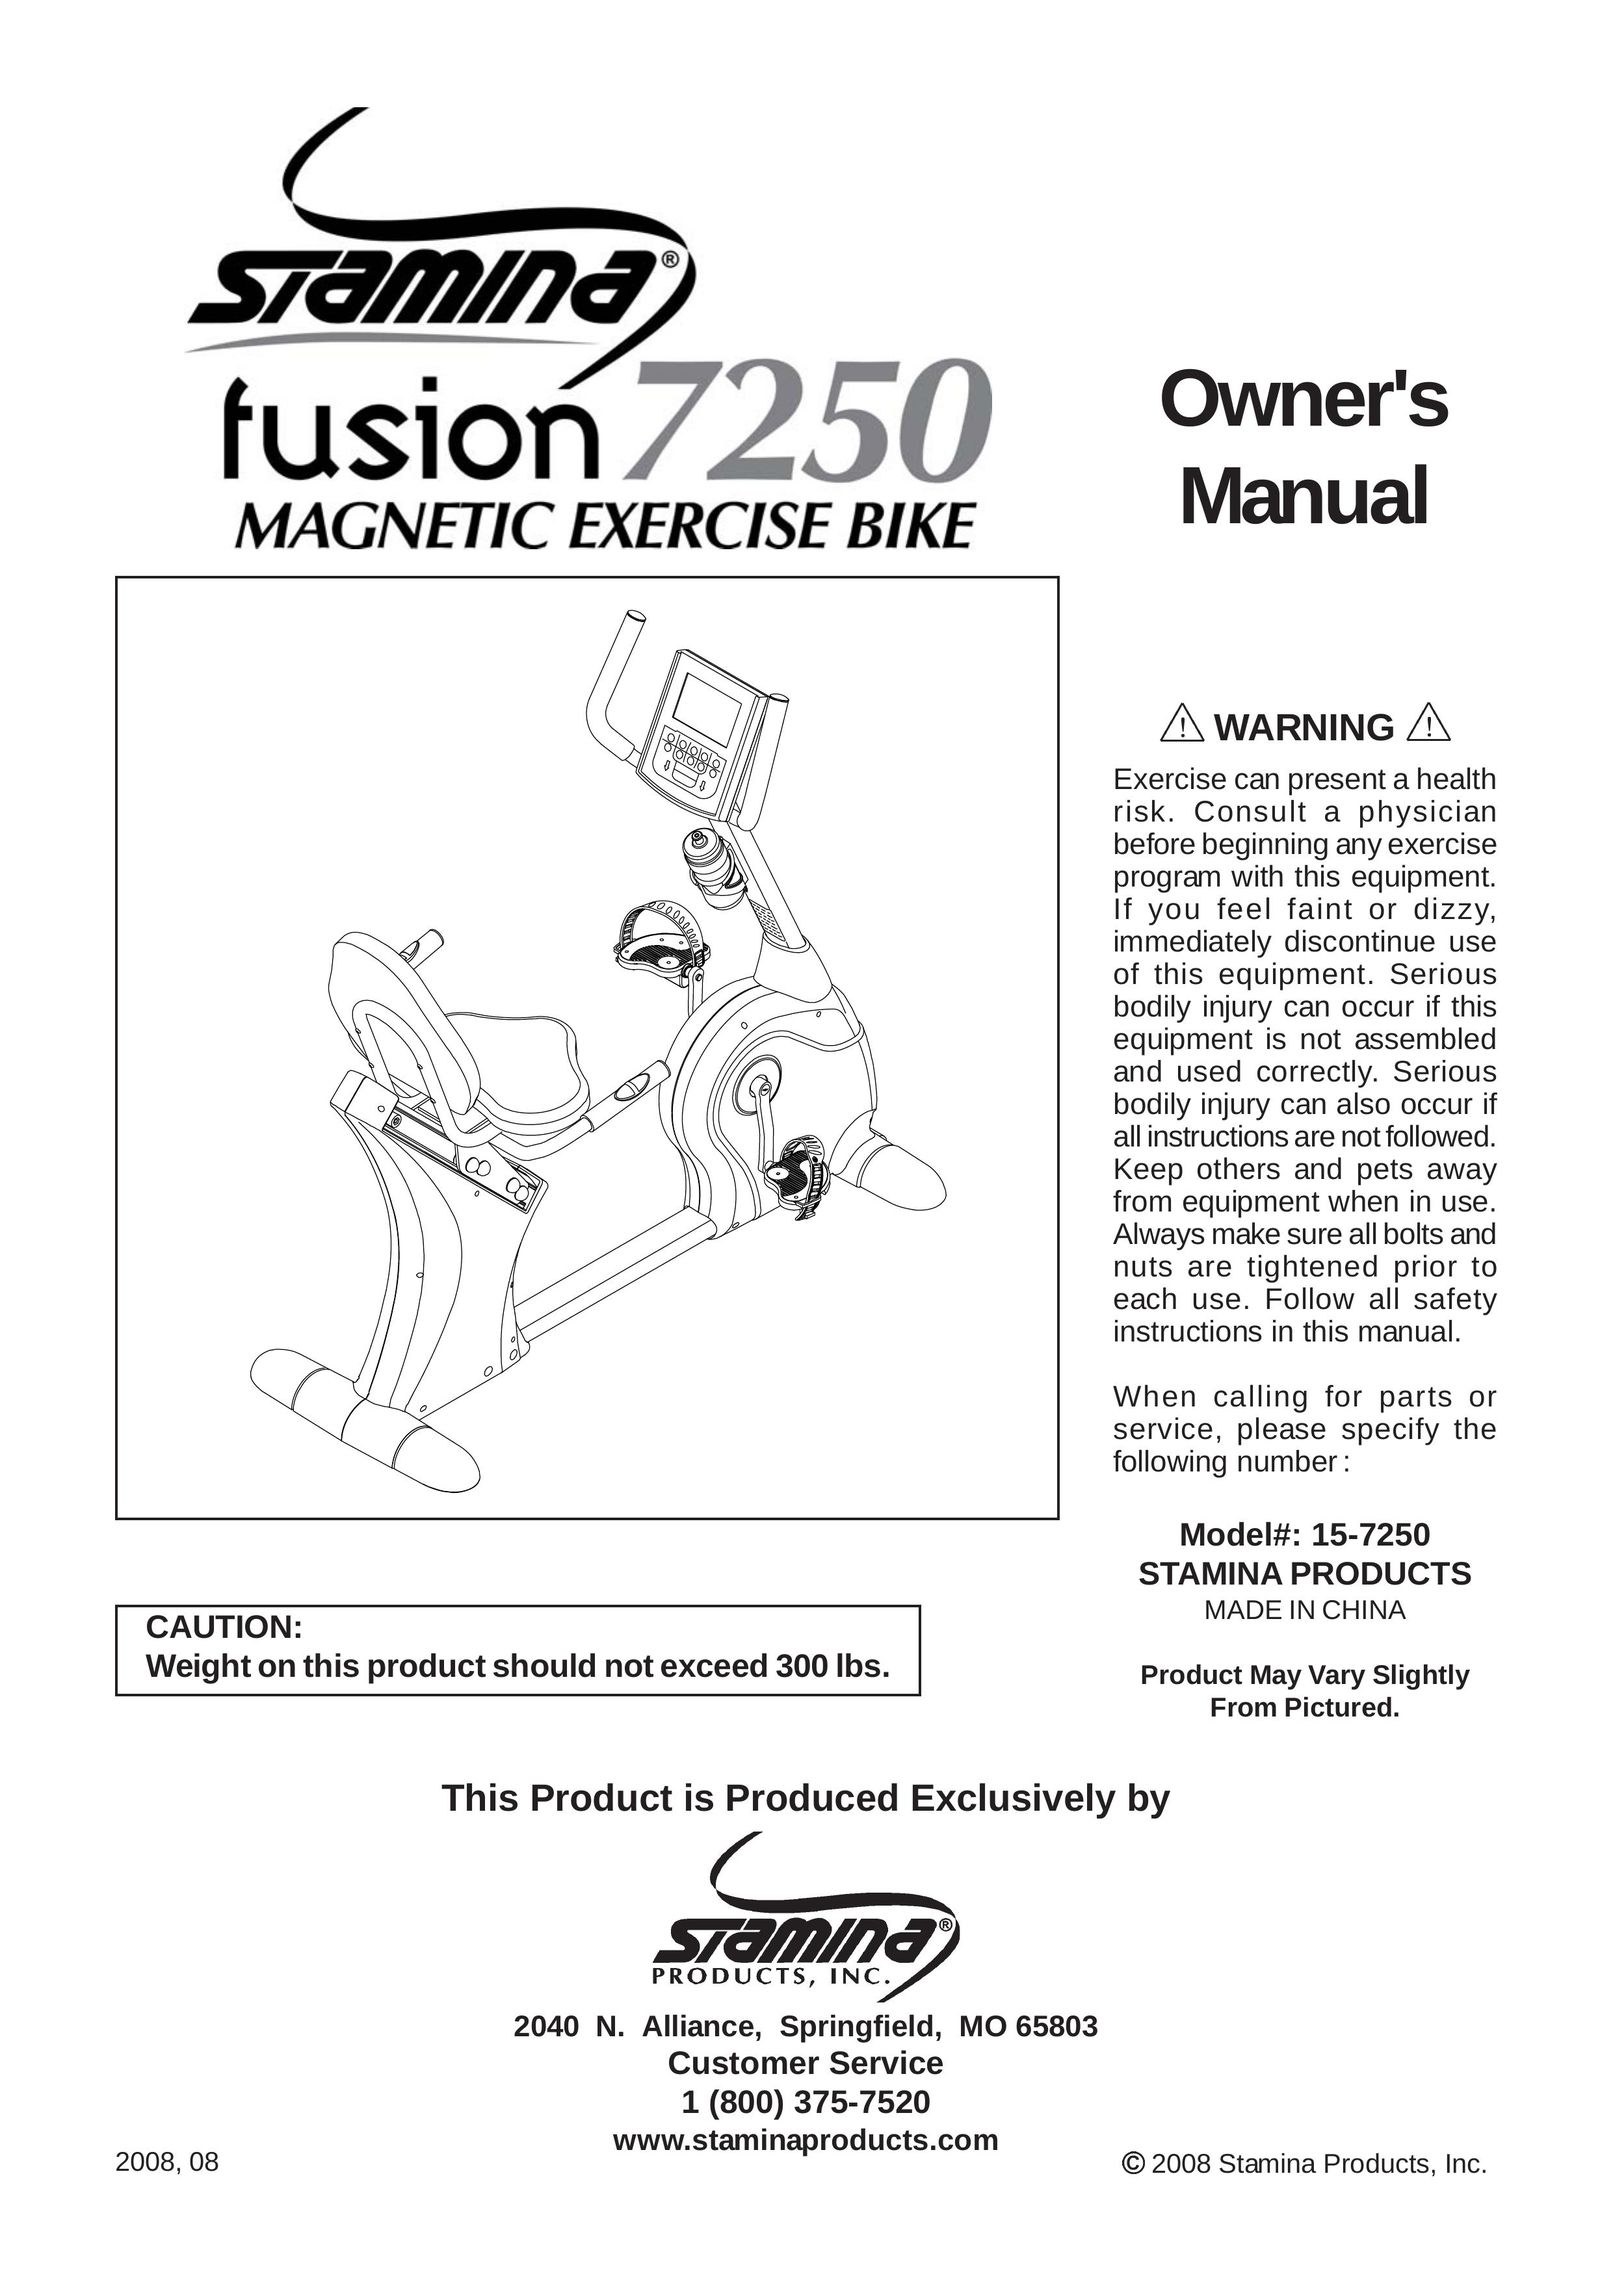 Stamina Products 15-7250 Elliptical Trainer User Manual